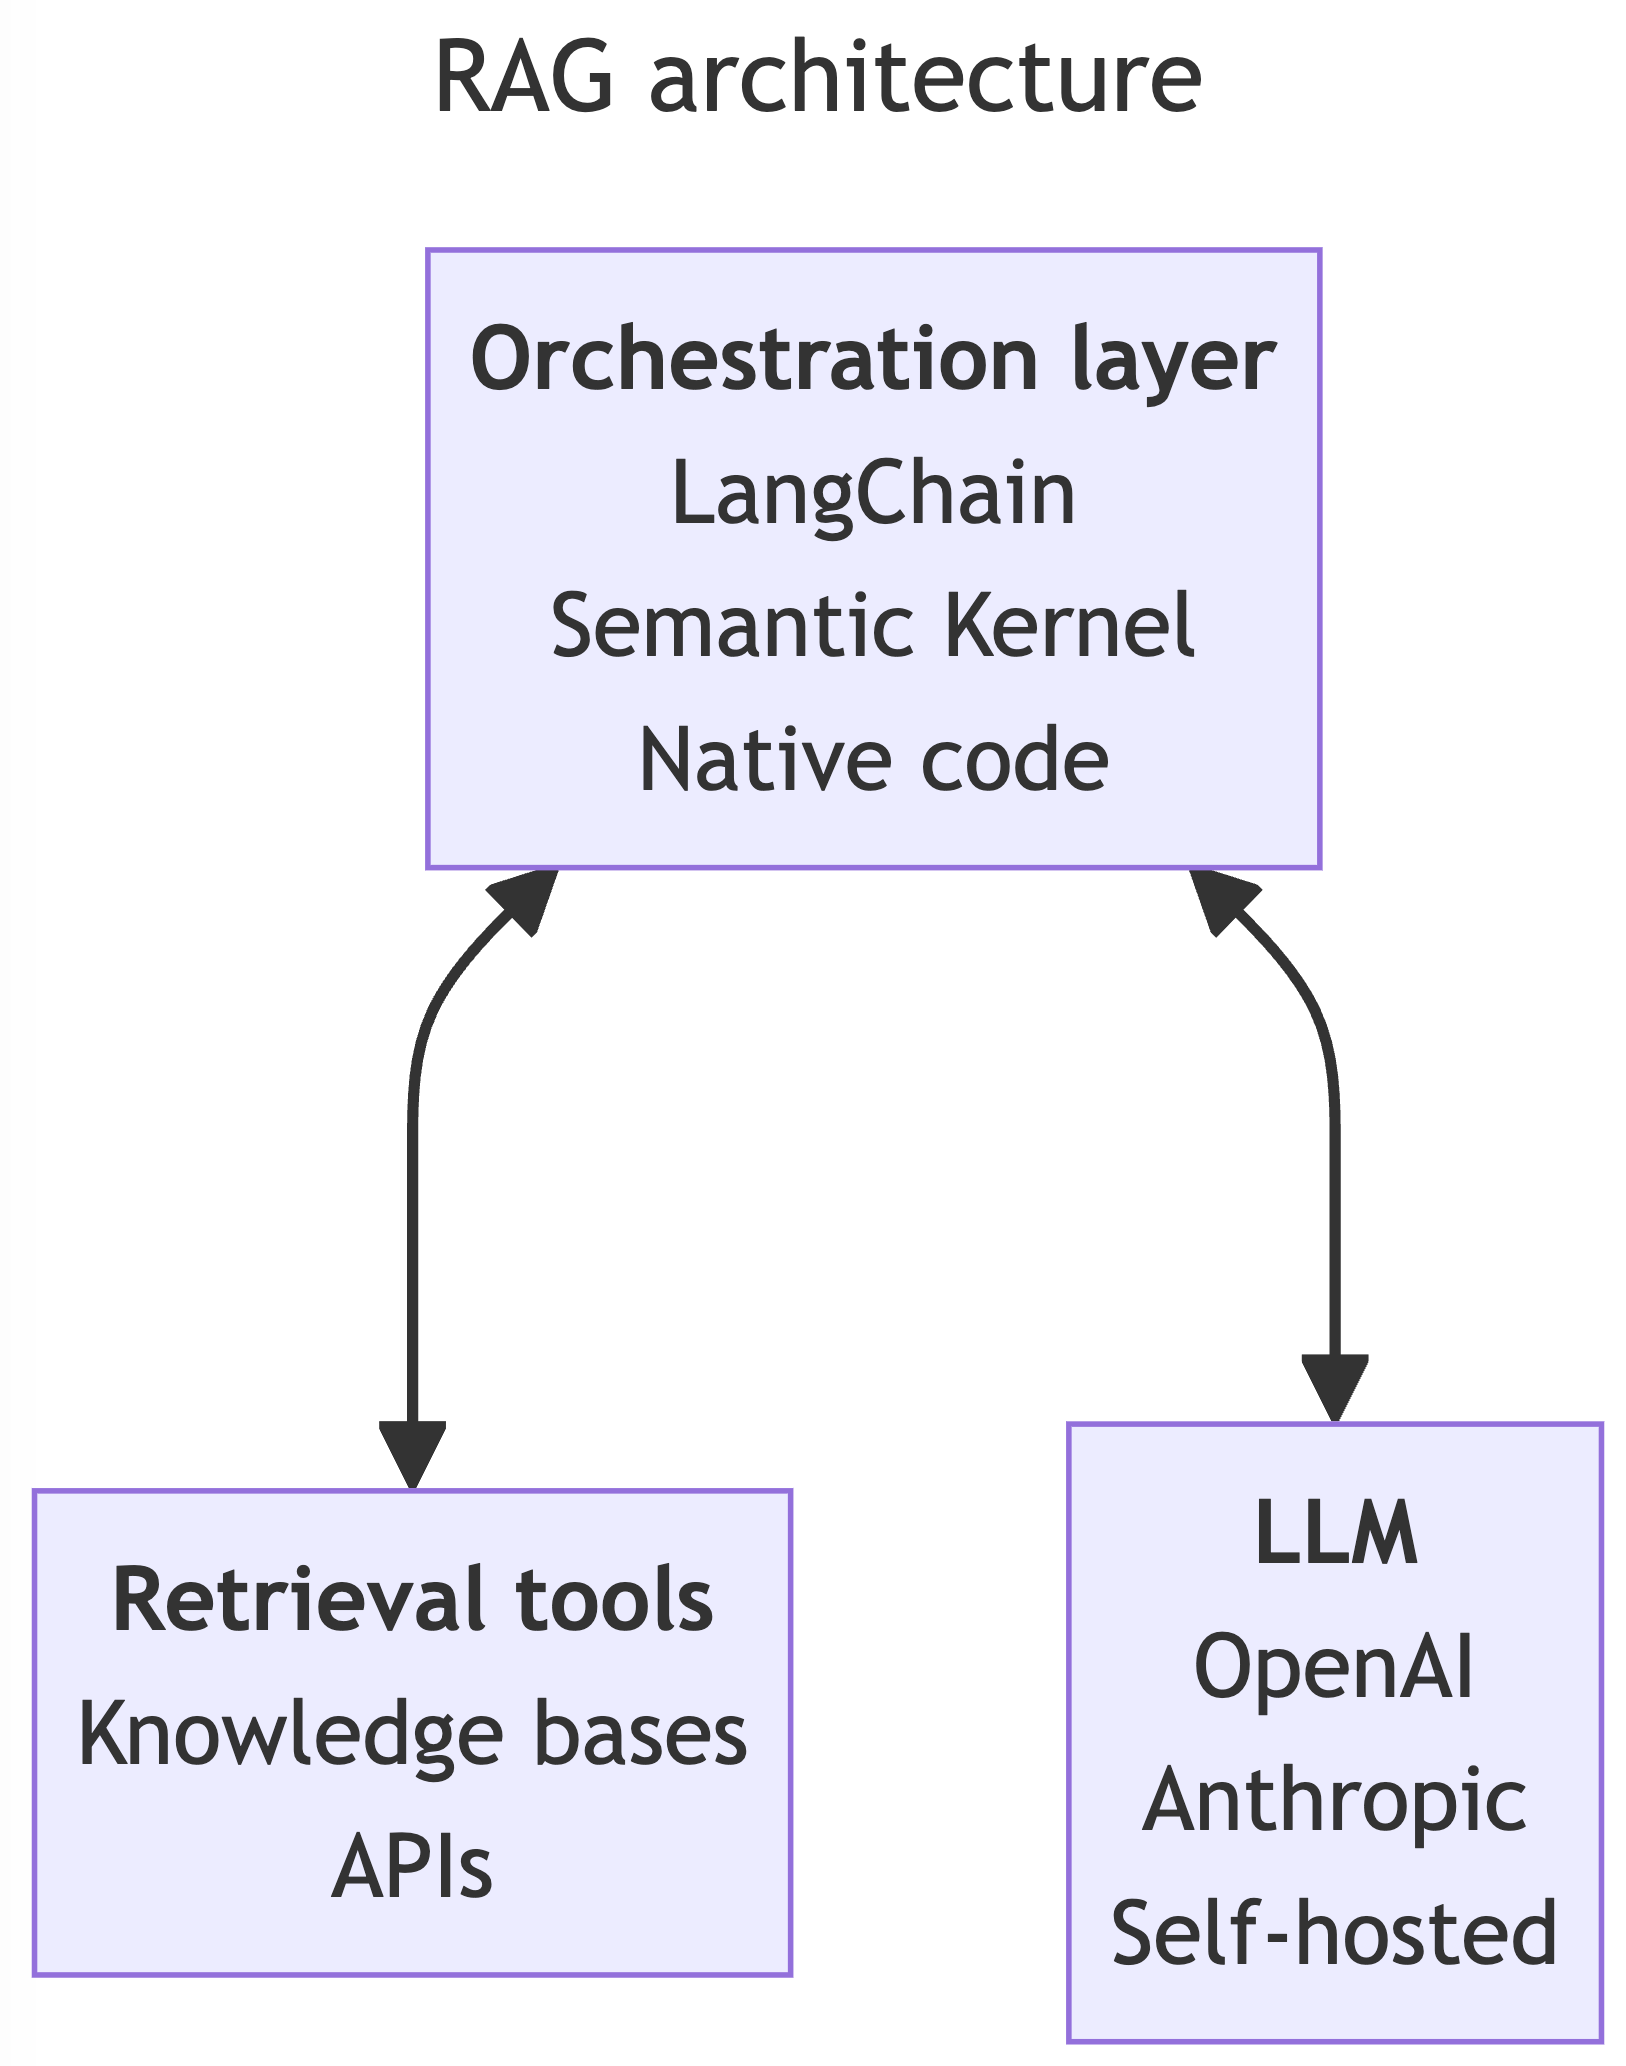 A diagram titled RAG architecture. The orchestration layer includes LangChain, Semantic Kernel, and Native code, the retrieval tools include knowledge bases and APIs, and the LLMs include OpenAI, Anthropic, and Self-hosted